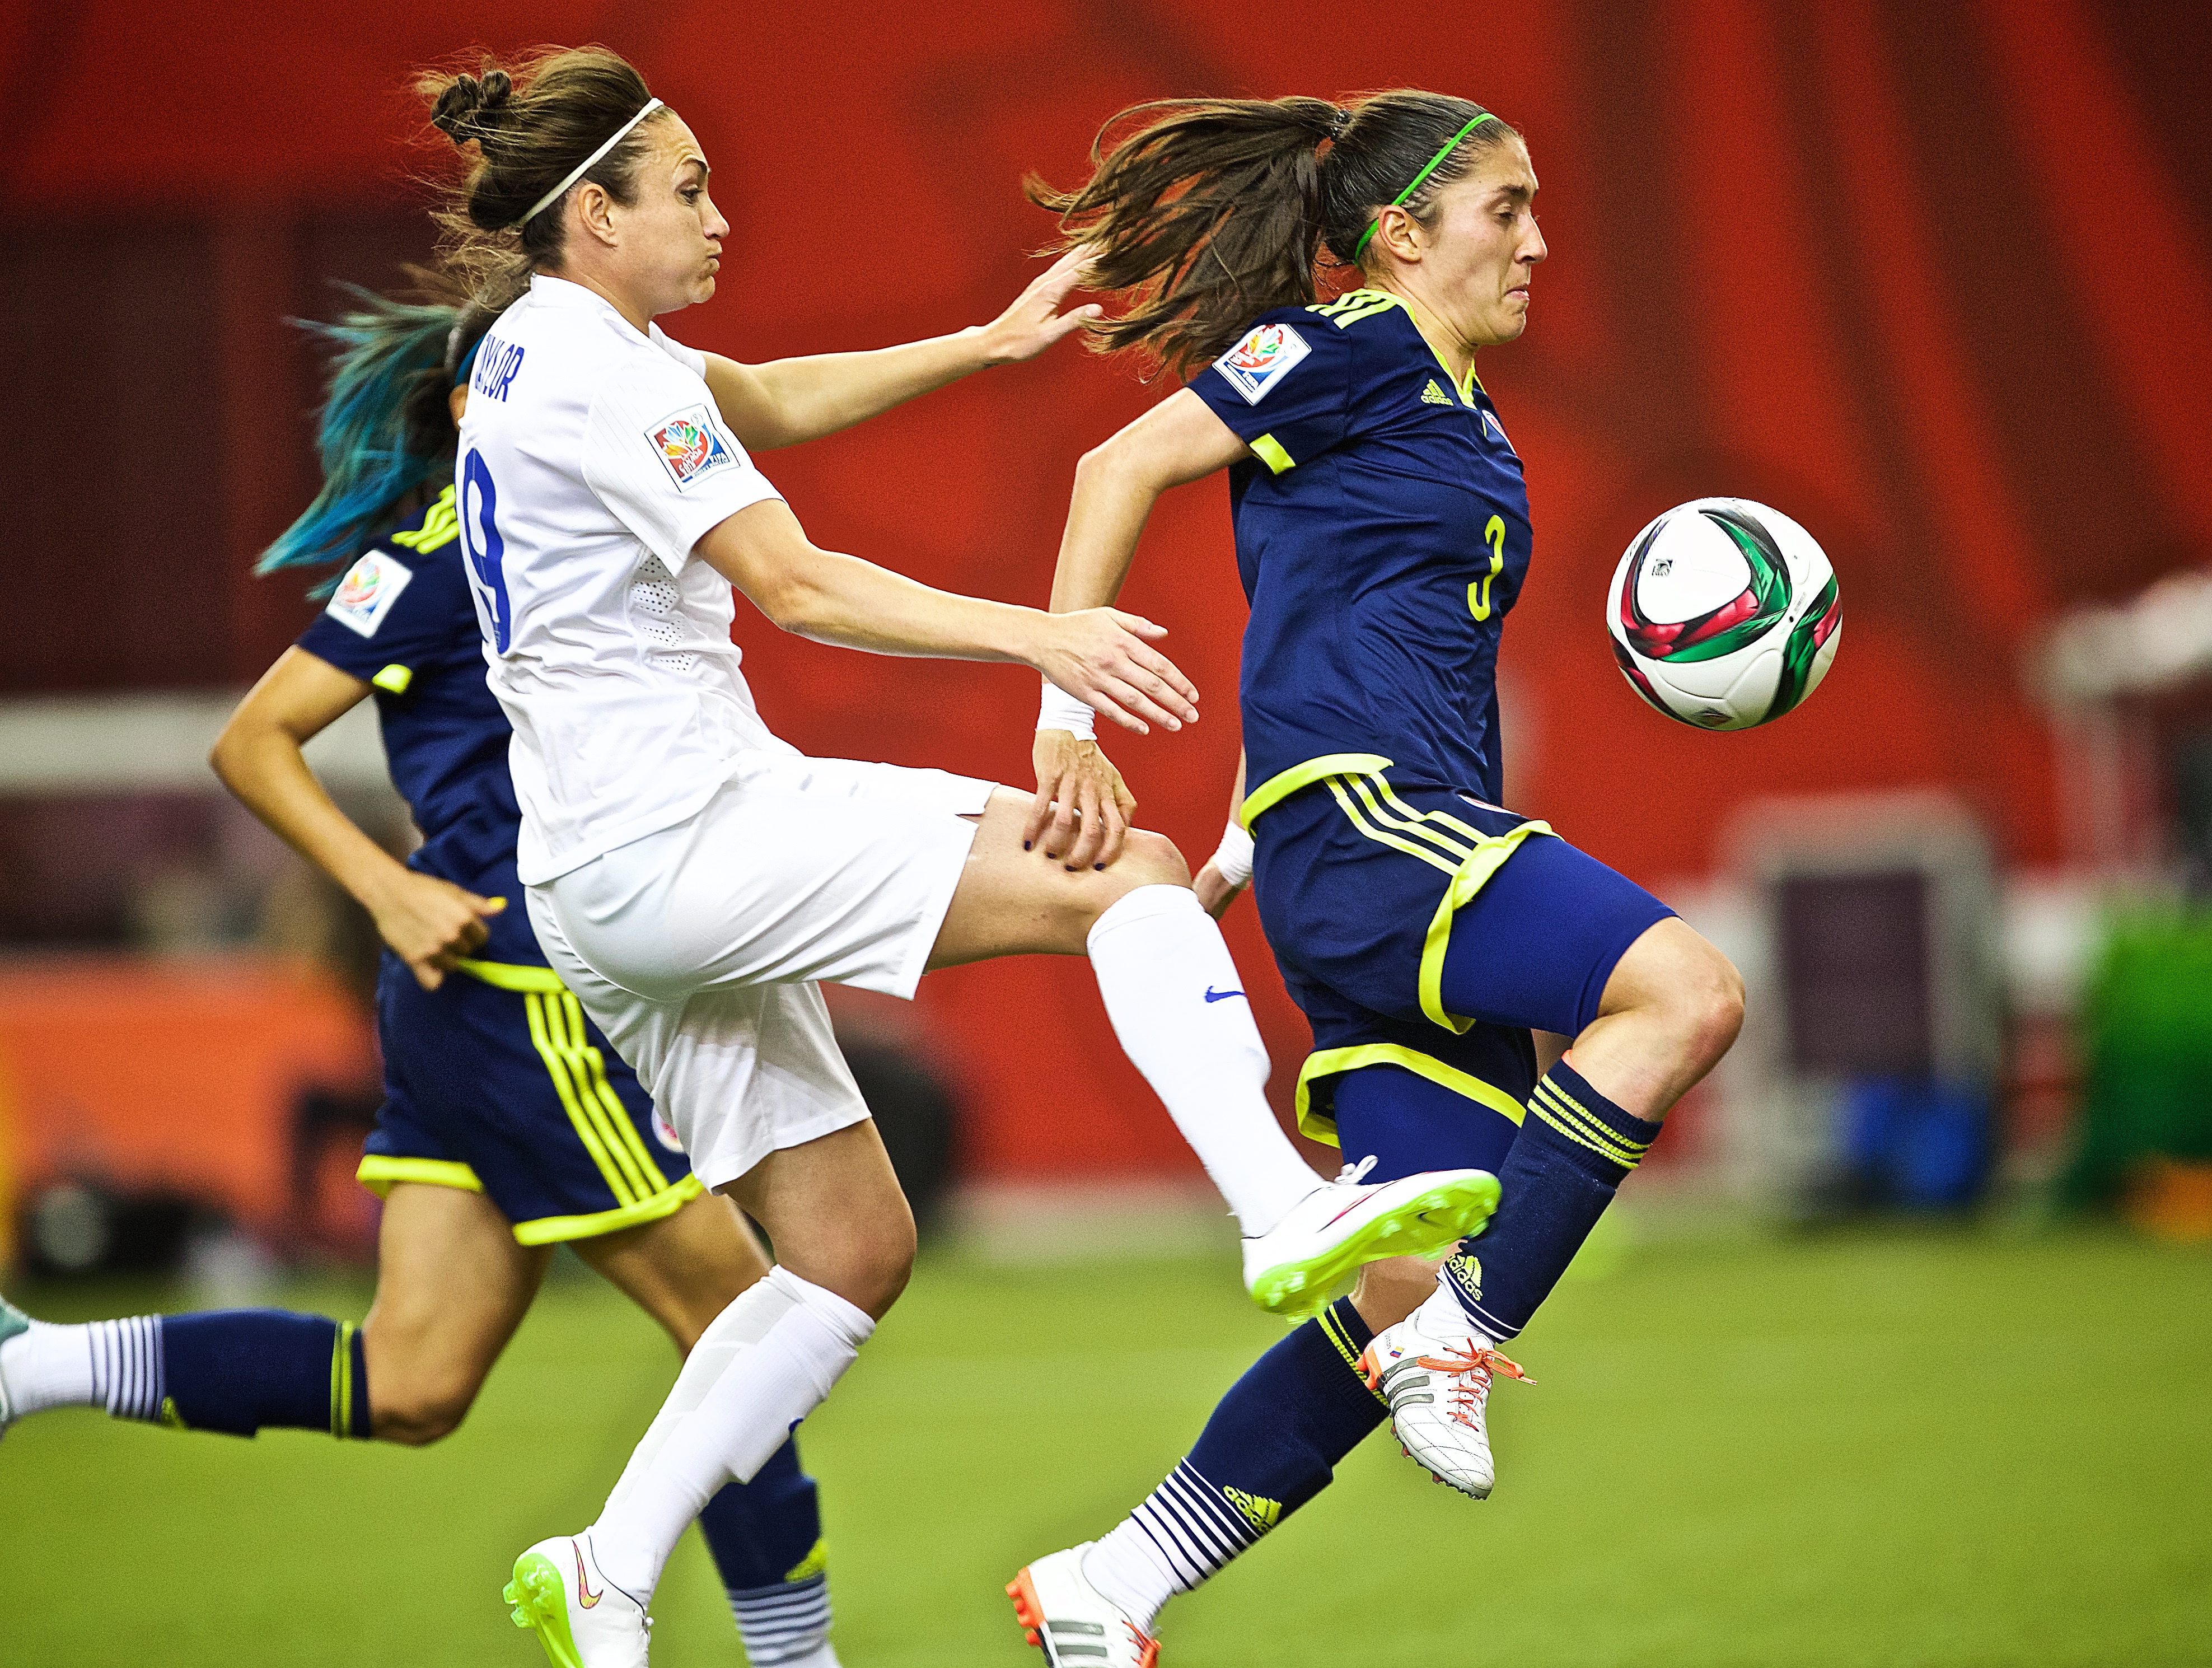 Colombia's Nahtalia Gaitan Defender (R)in action against  England's Eniola Aluko forward (L) during second half in the FIFA Women's World Cup Group F match between England and Colombia in the Olympic Stadium in Montreal, Canada,